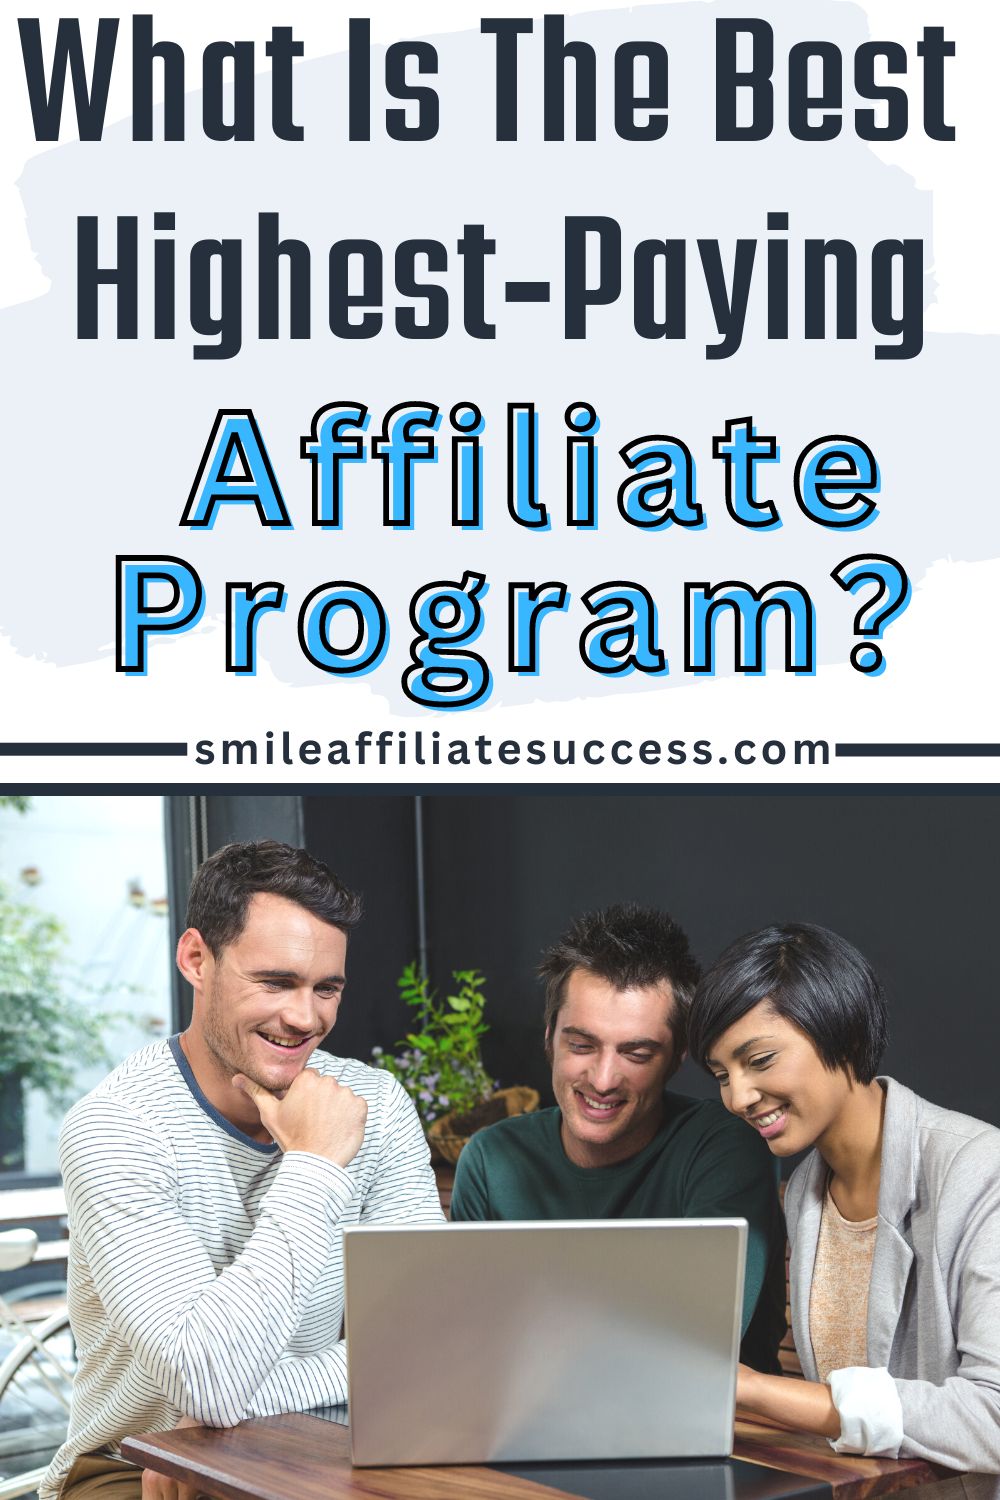 What Is The Best And Highest-Paying Affiliate Program?